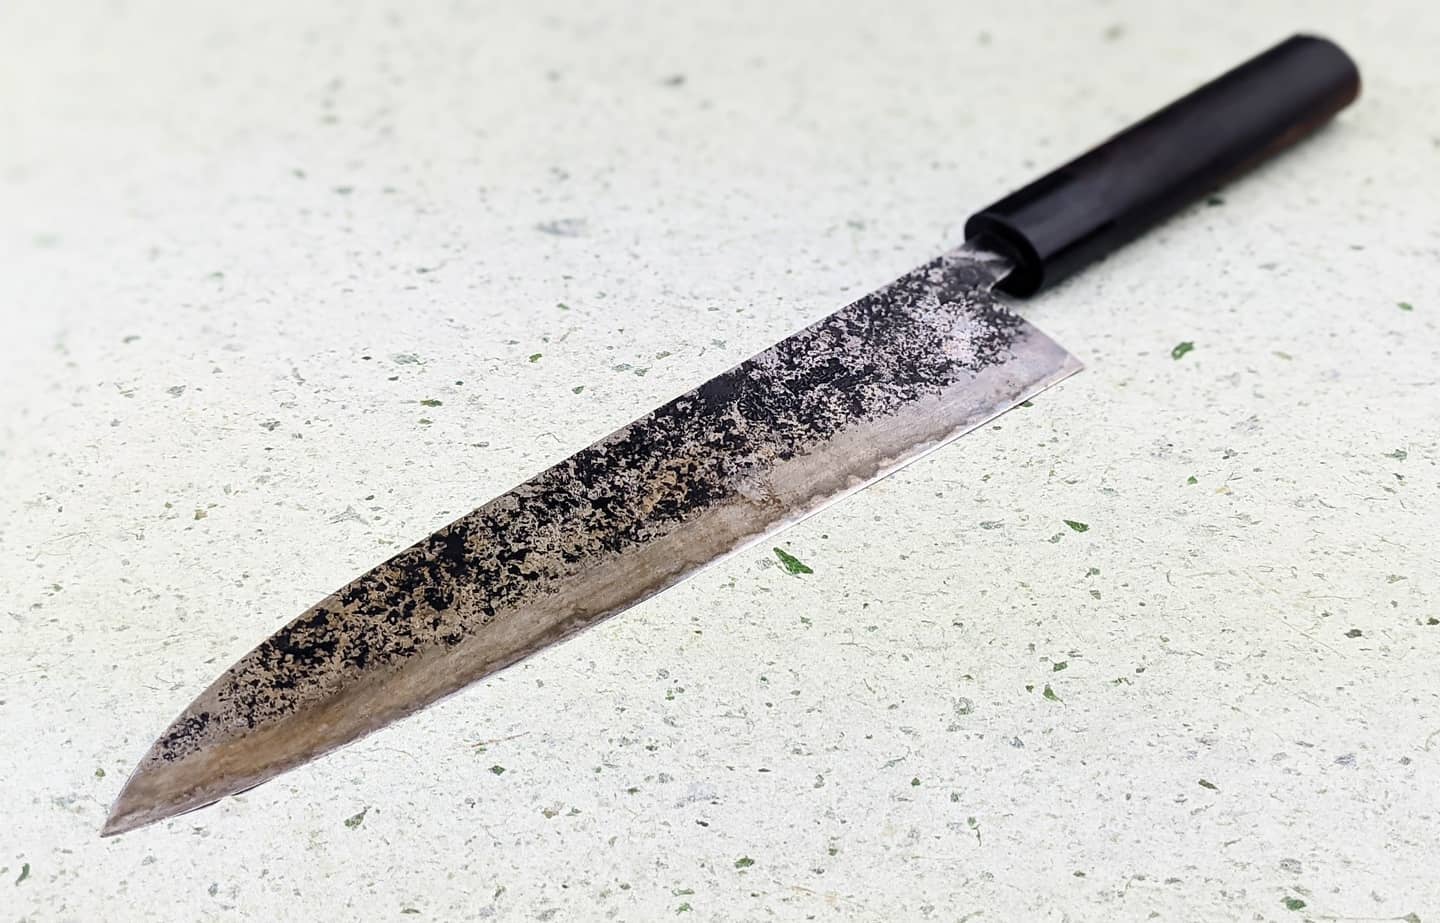 Caring for Carbon Steel Knives – The Simple Way to Keep Carbon